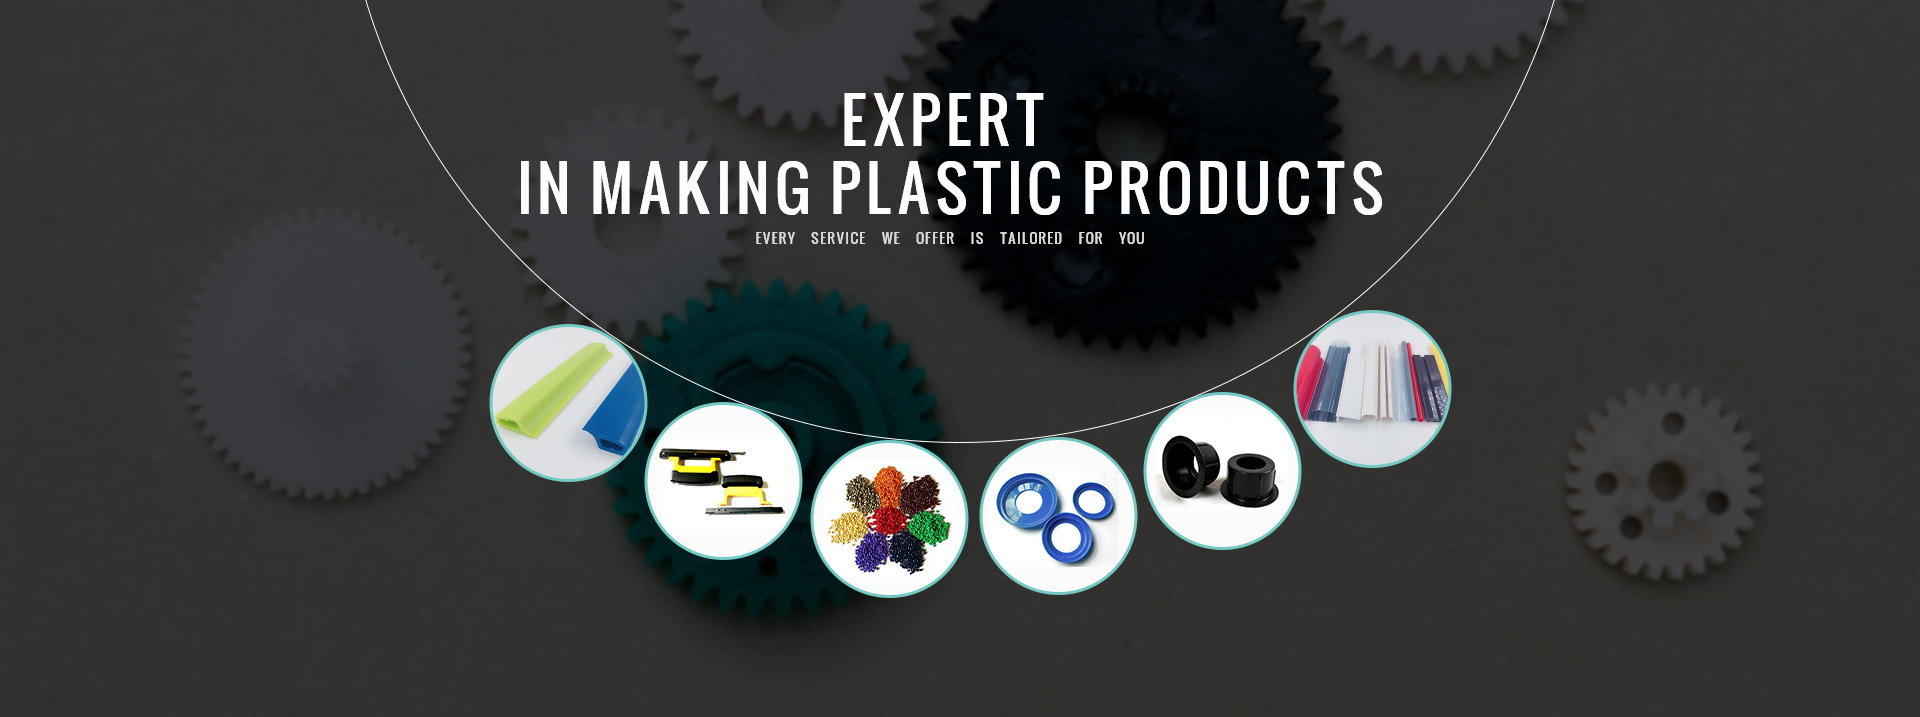 banner | Plastic Profiles & Injection Molded Products - Dalilai Plastics